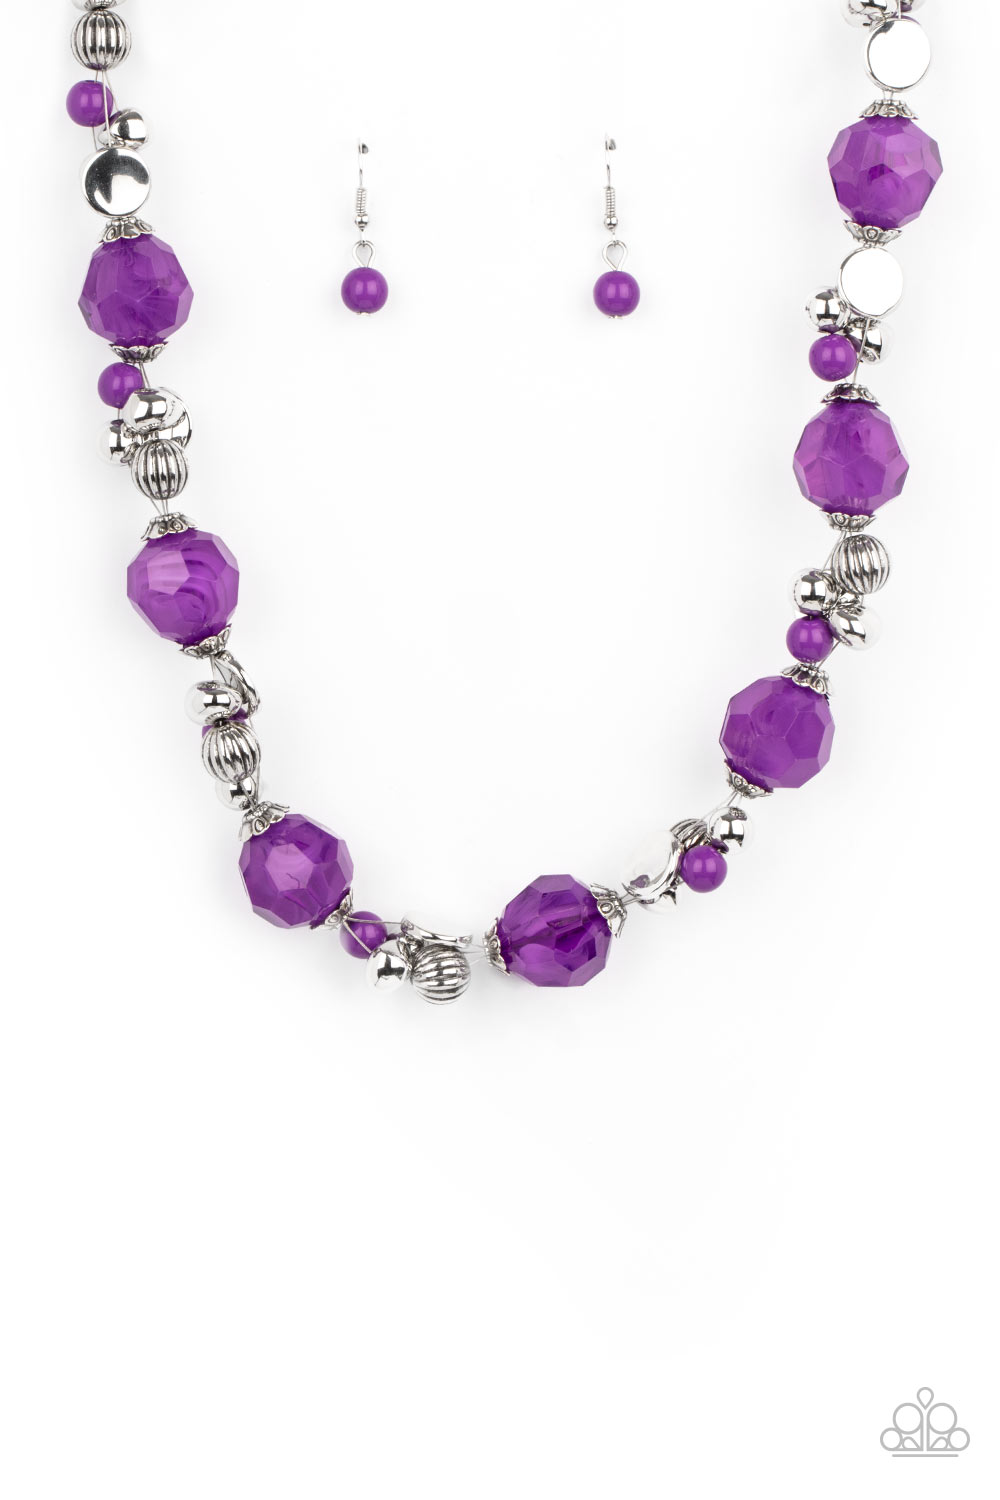  Amethyst Orchid crystal-like beads join clusters of mismatched silver and Amethyst Orchid beads along a wire